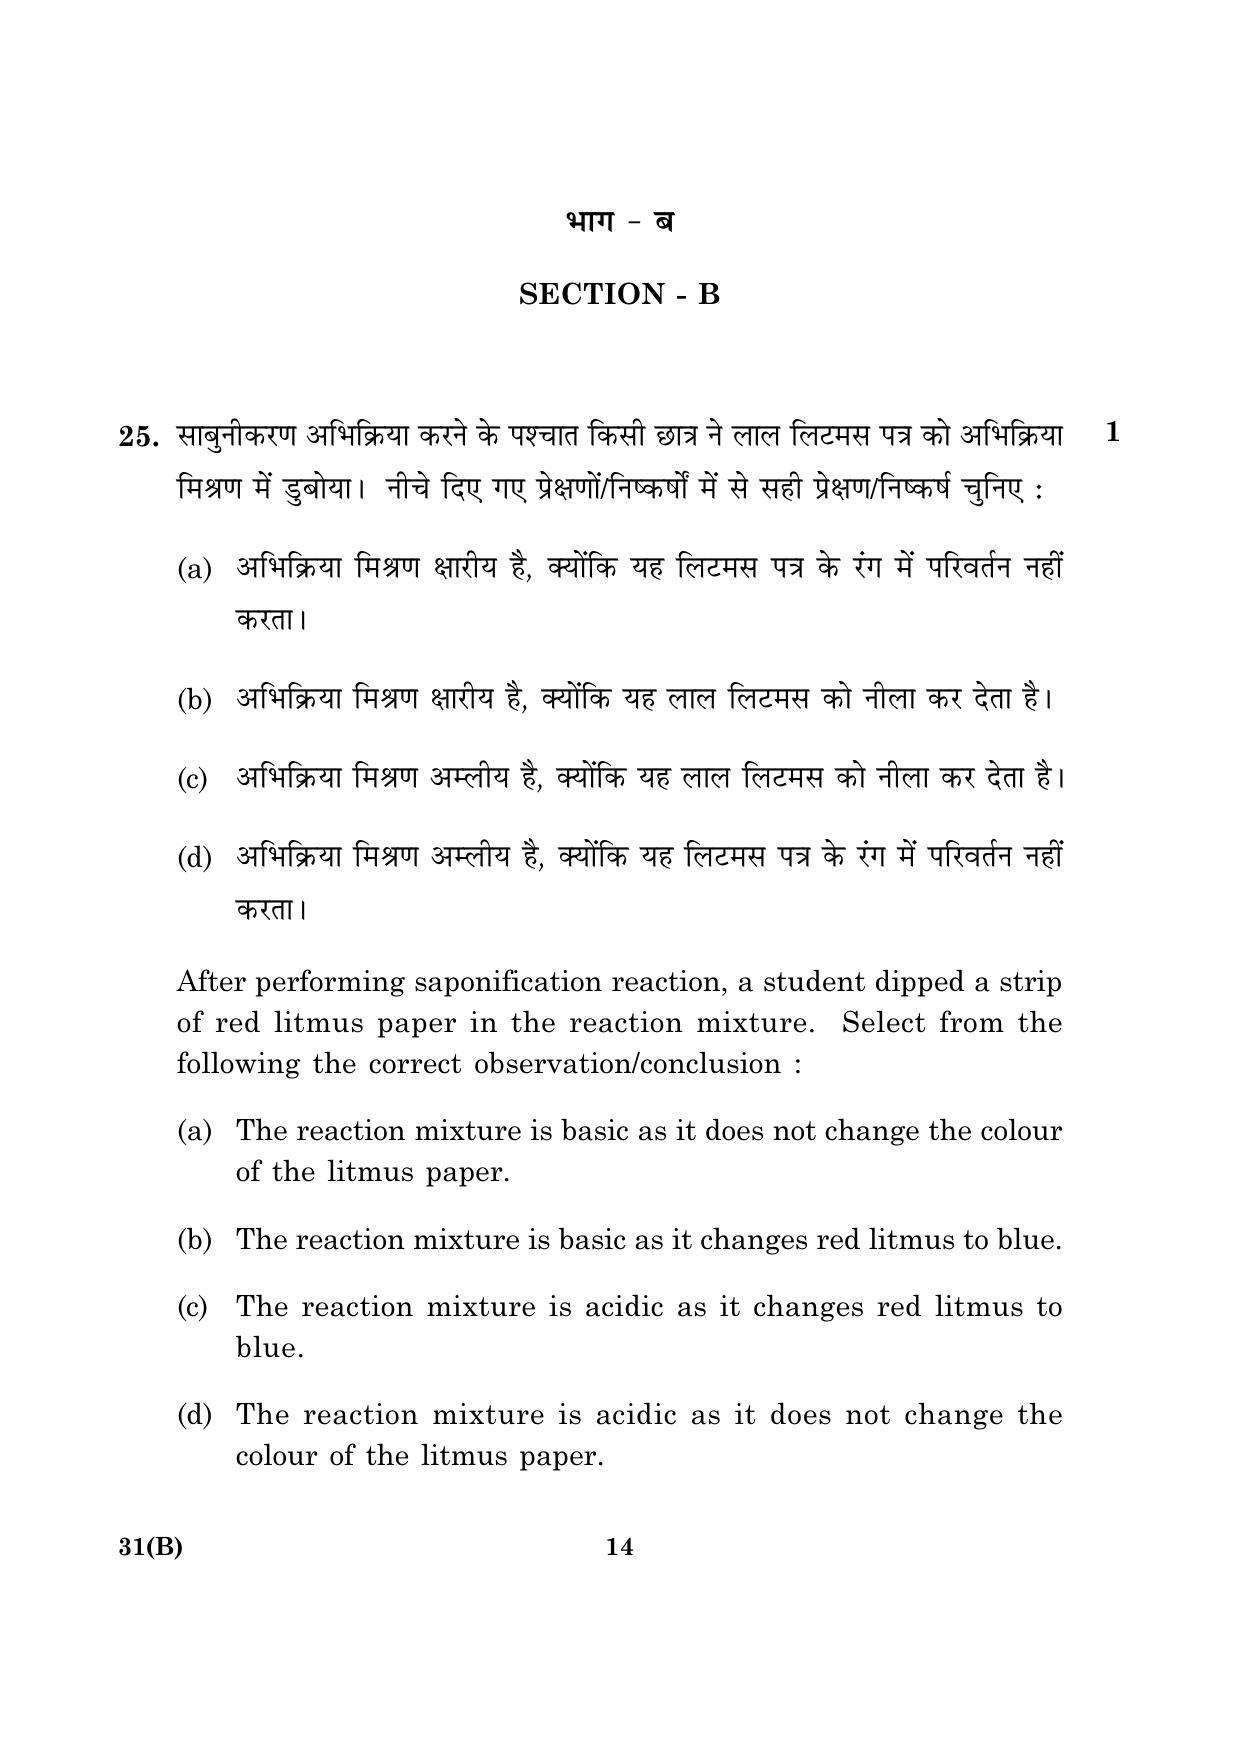 CBSE Class 10 031(B) Science 2016 Question Paper - Page 14